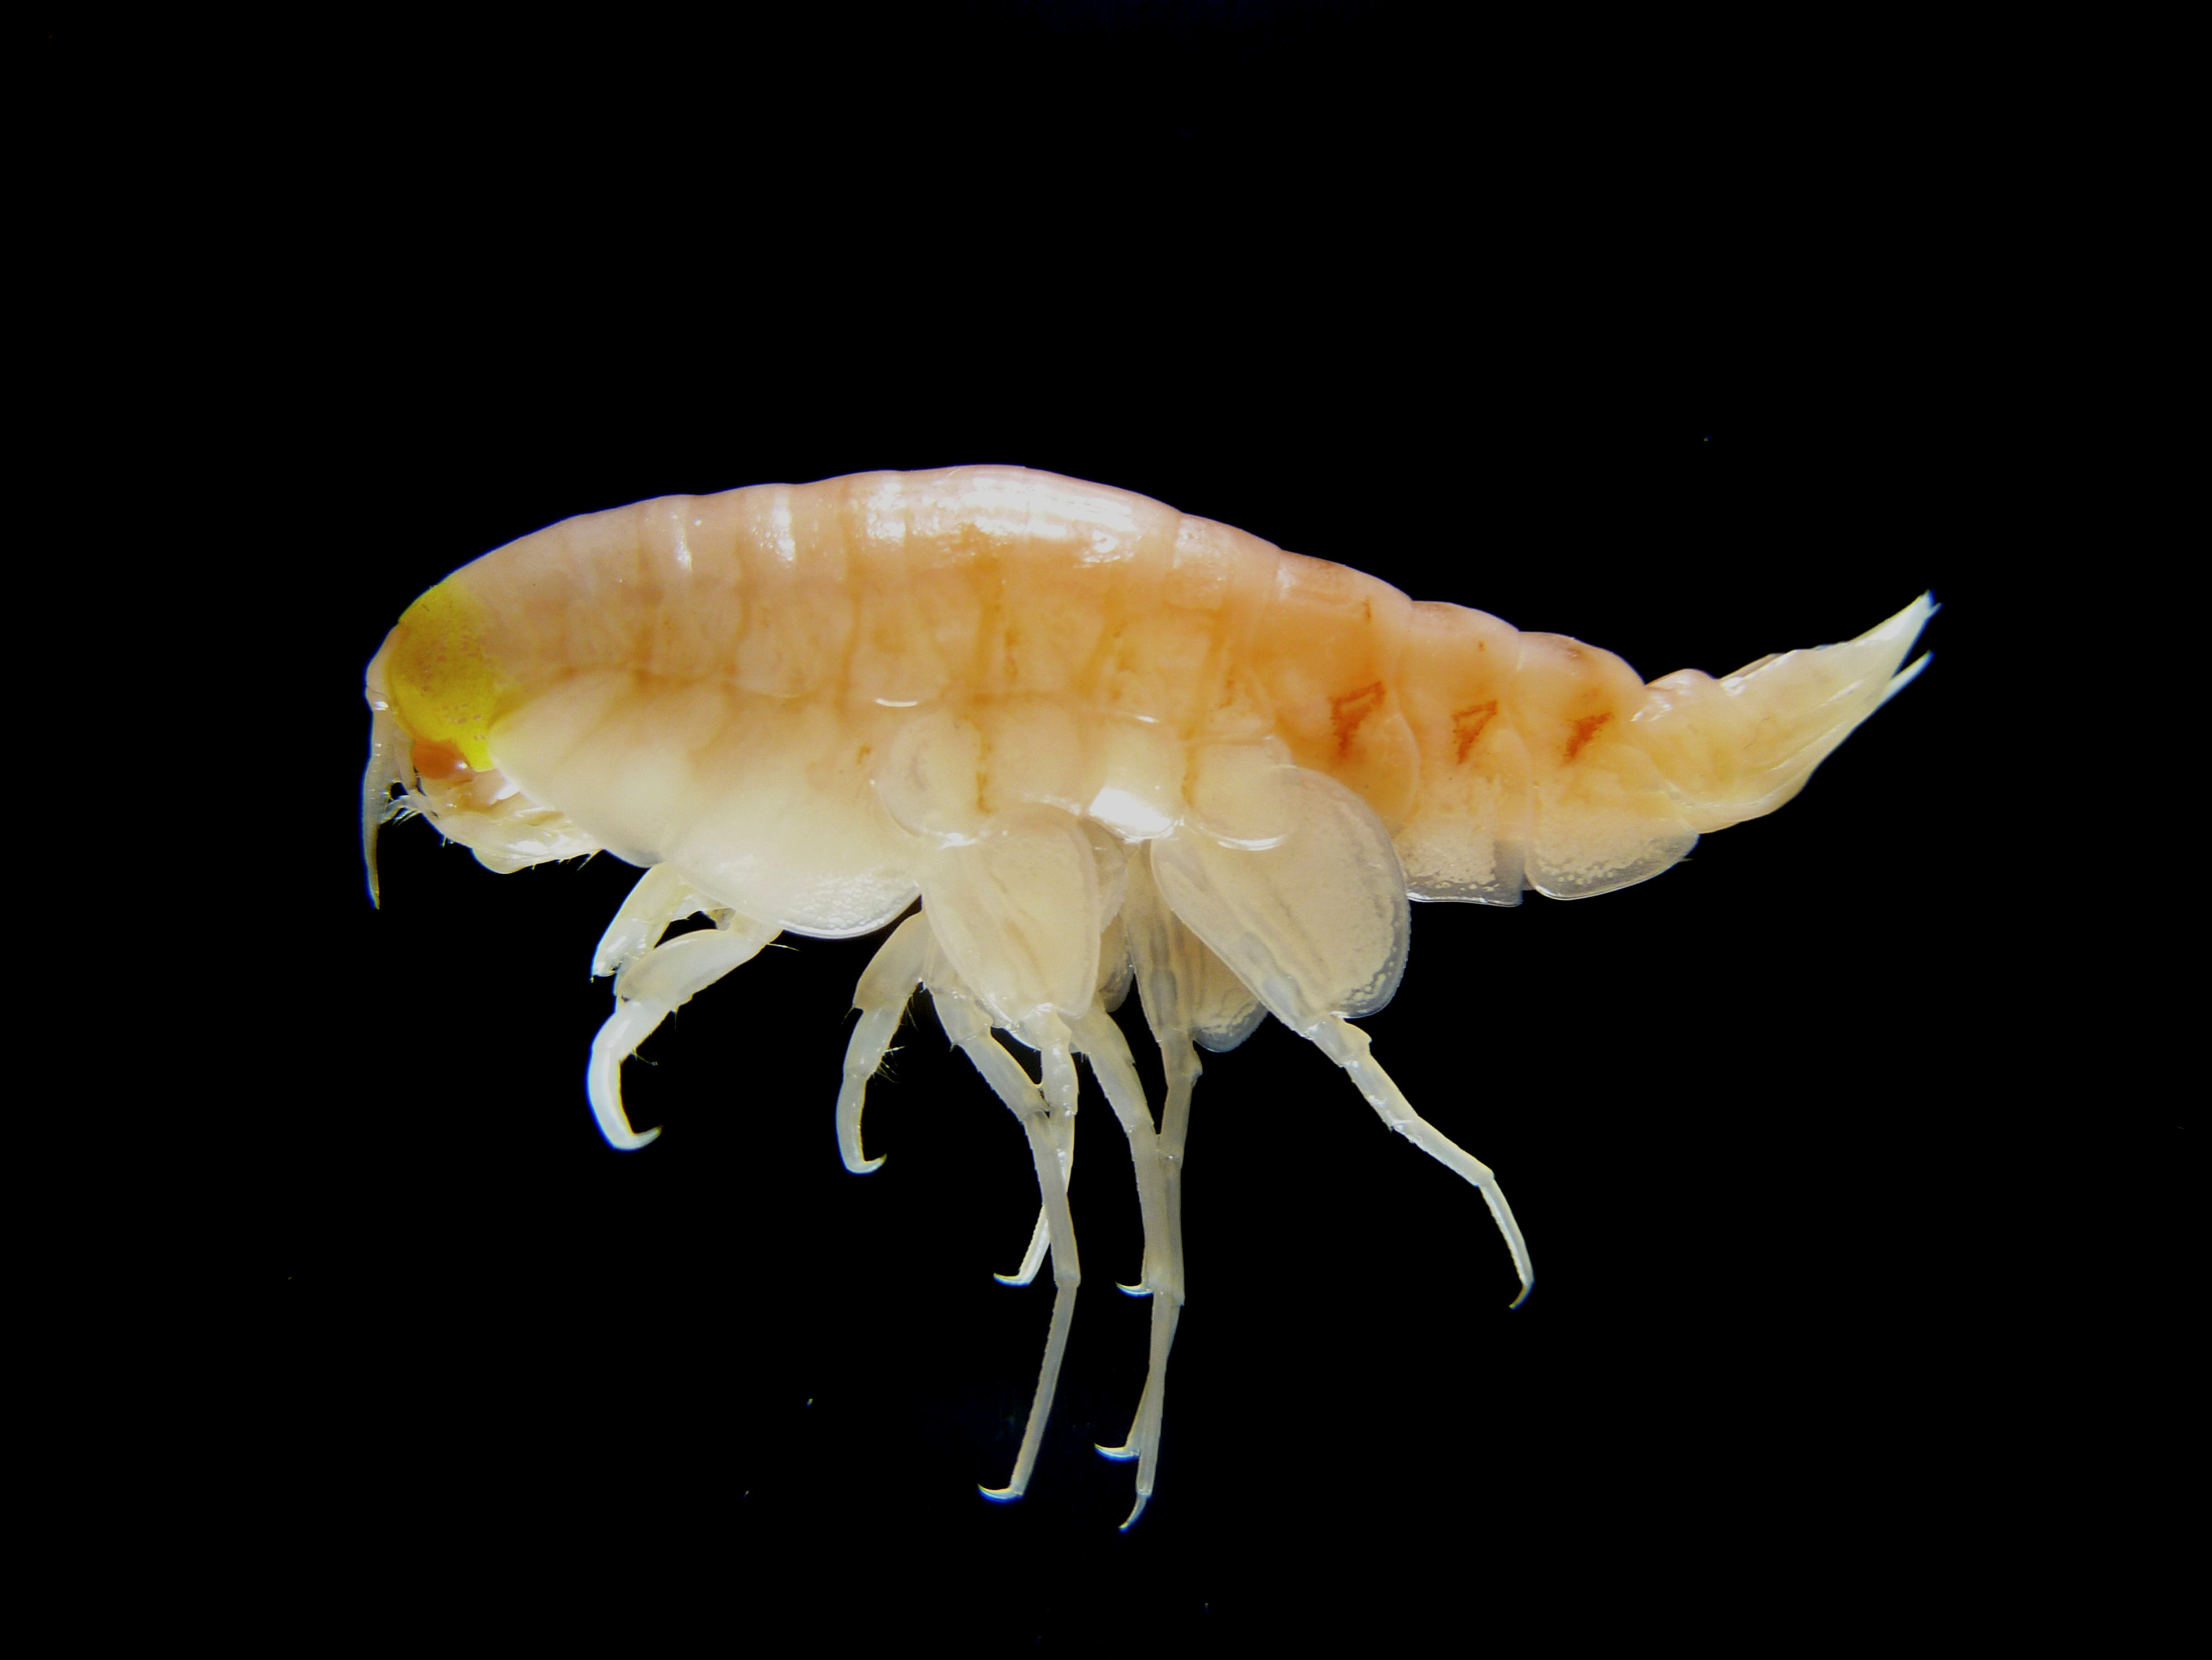 Man-made pollutants have been found in a shrimp-like creature, Hirondellea gigas, from the deepest part of the ocean, more than 10,000 metres deep in the Mariana Trench, in the Northwest Pacific Ocean, in this handout photo provided February 13, 2017. (Alan Jamieson / Newcastle University / Handout via Reuters)